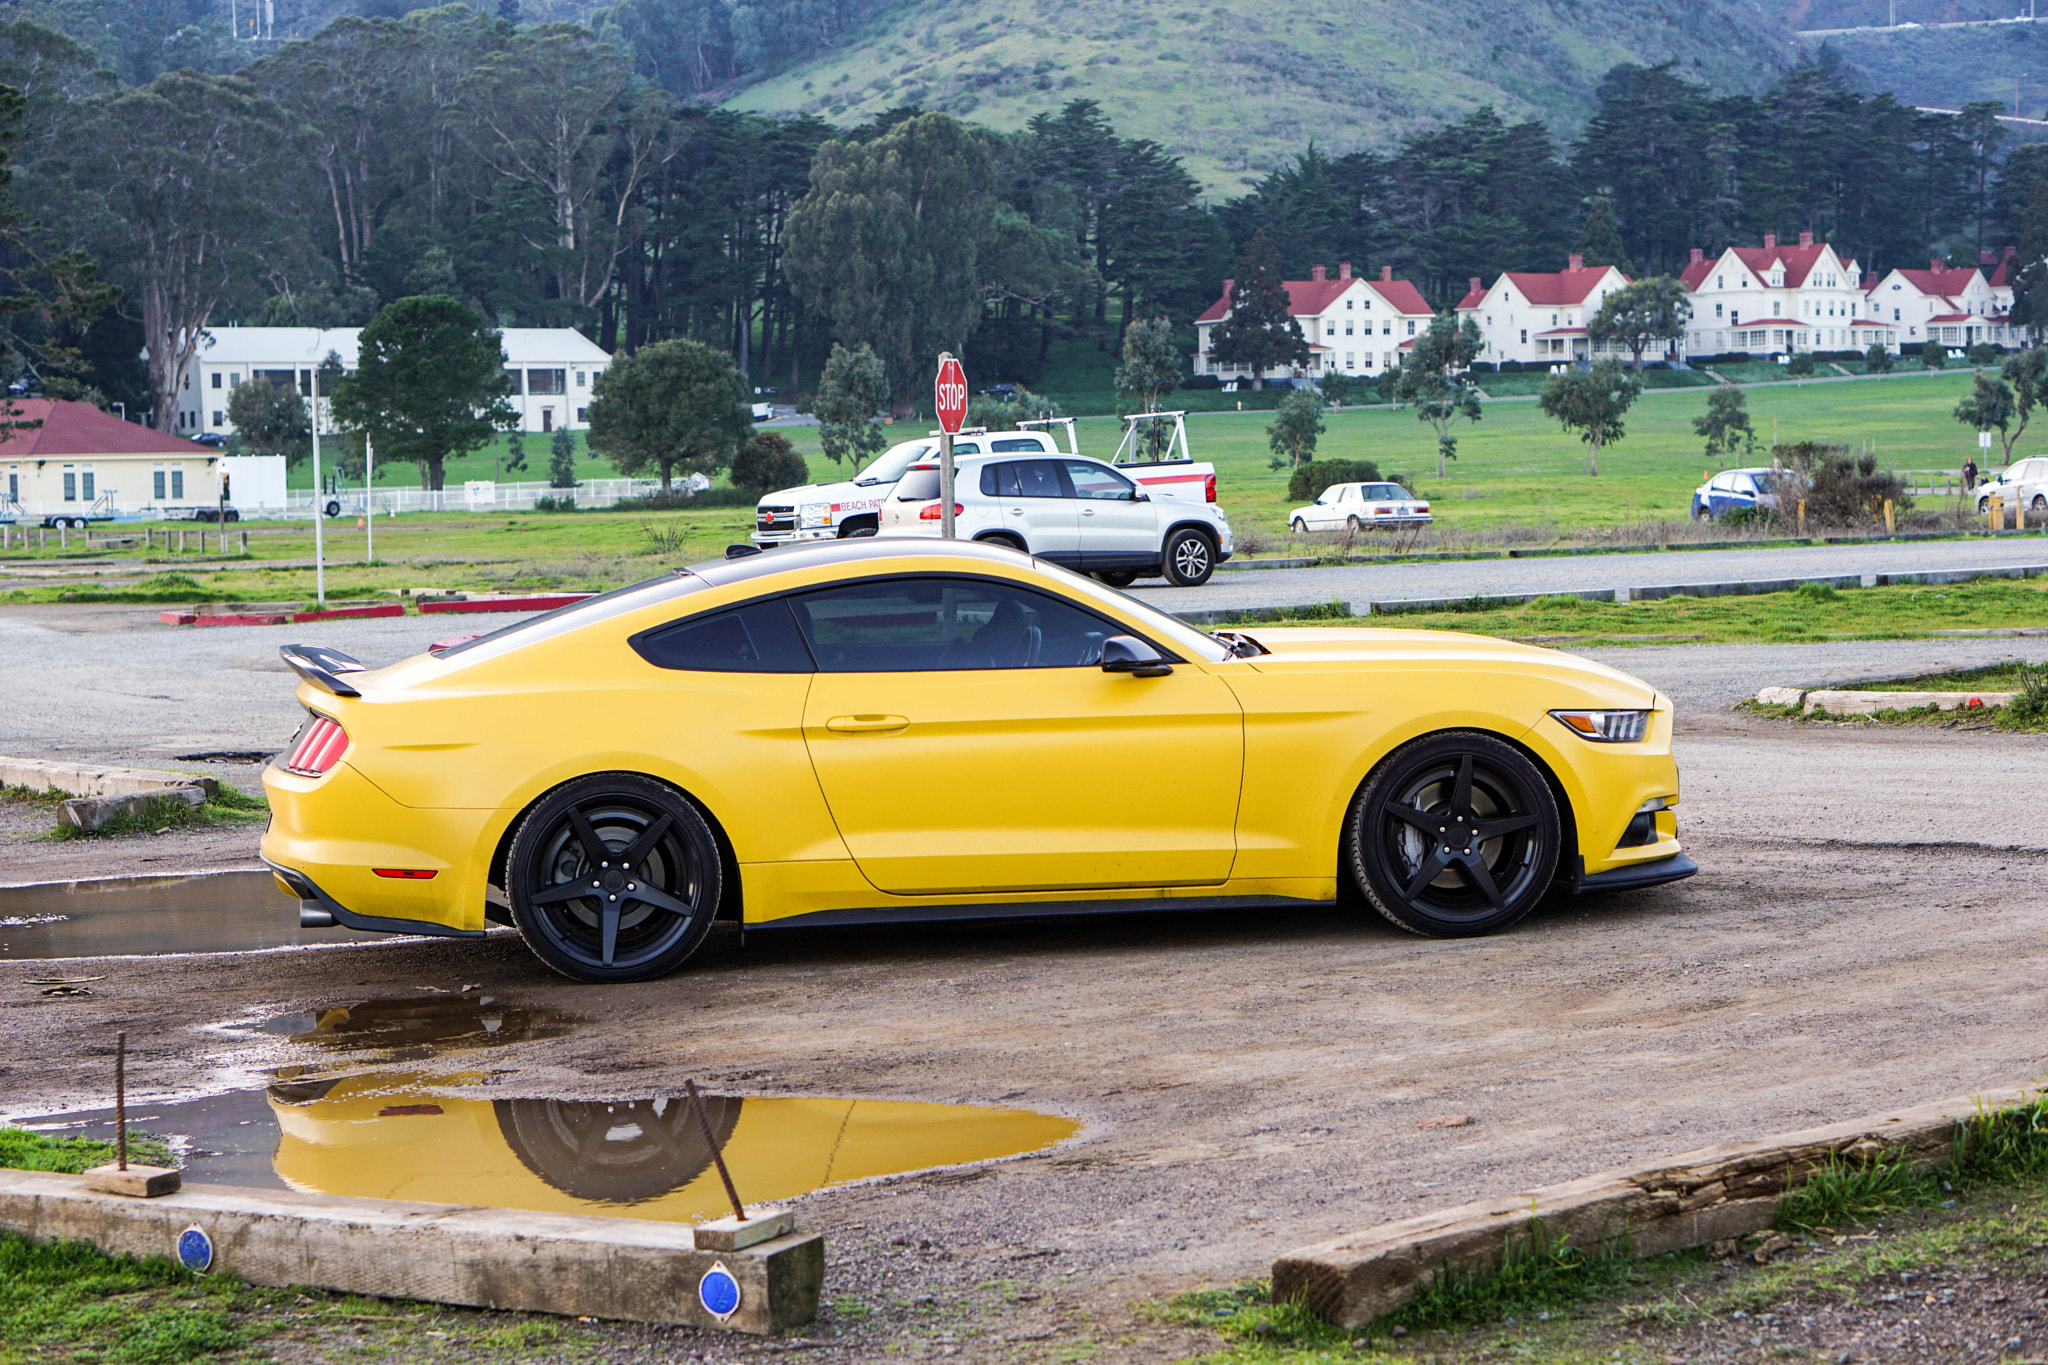 Sony a5100 sample photo. Yellow mustang photography